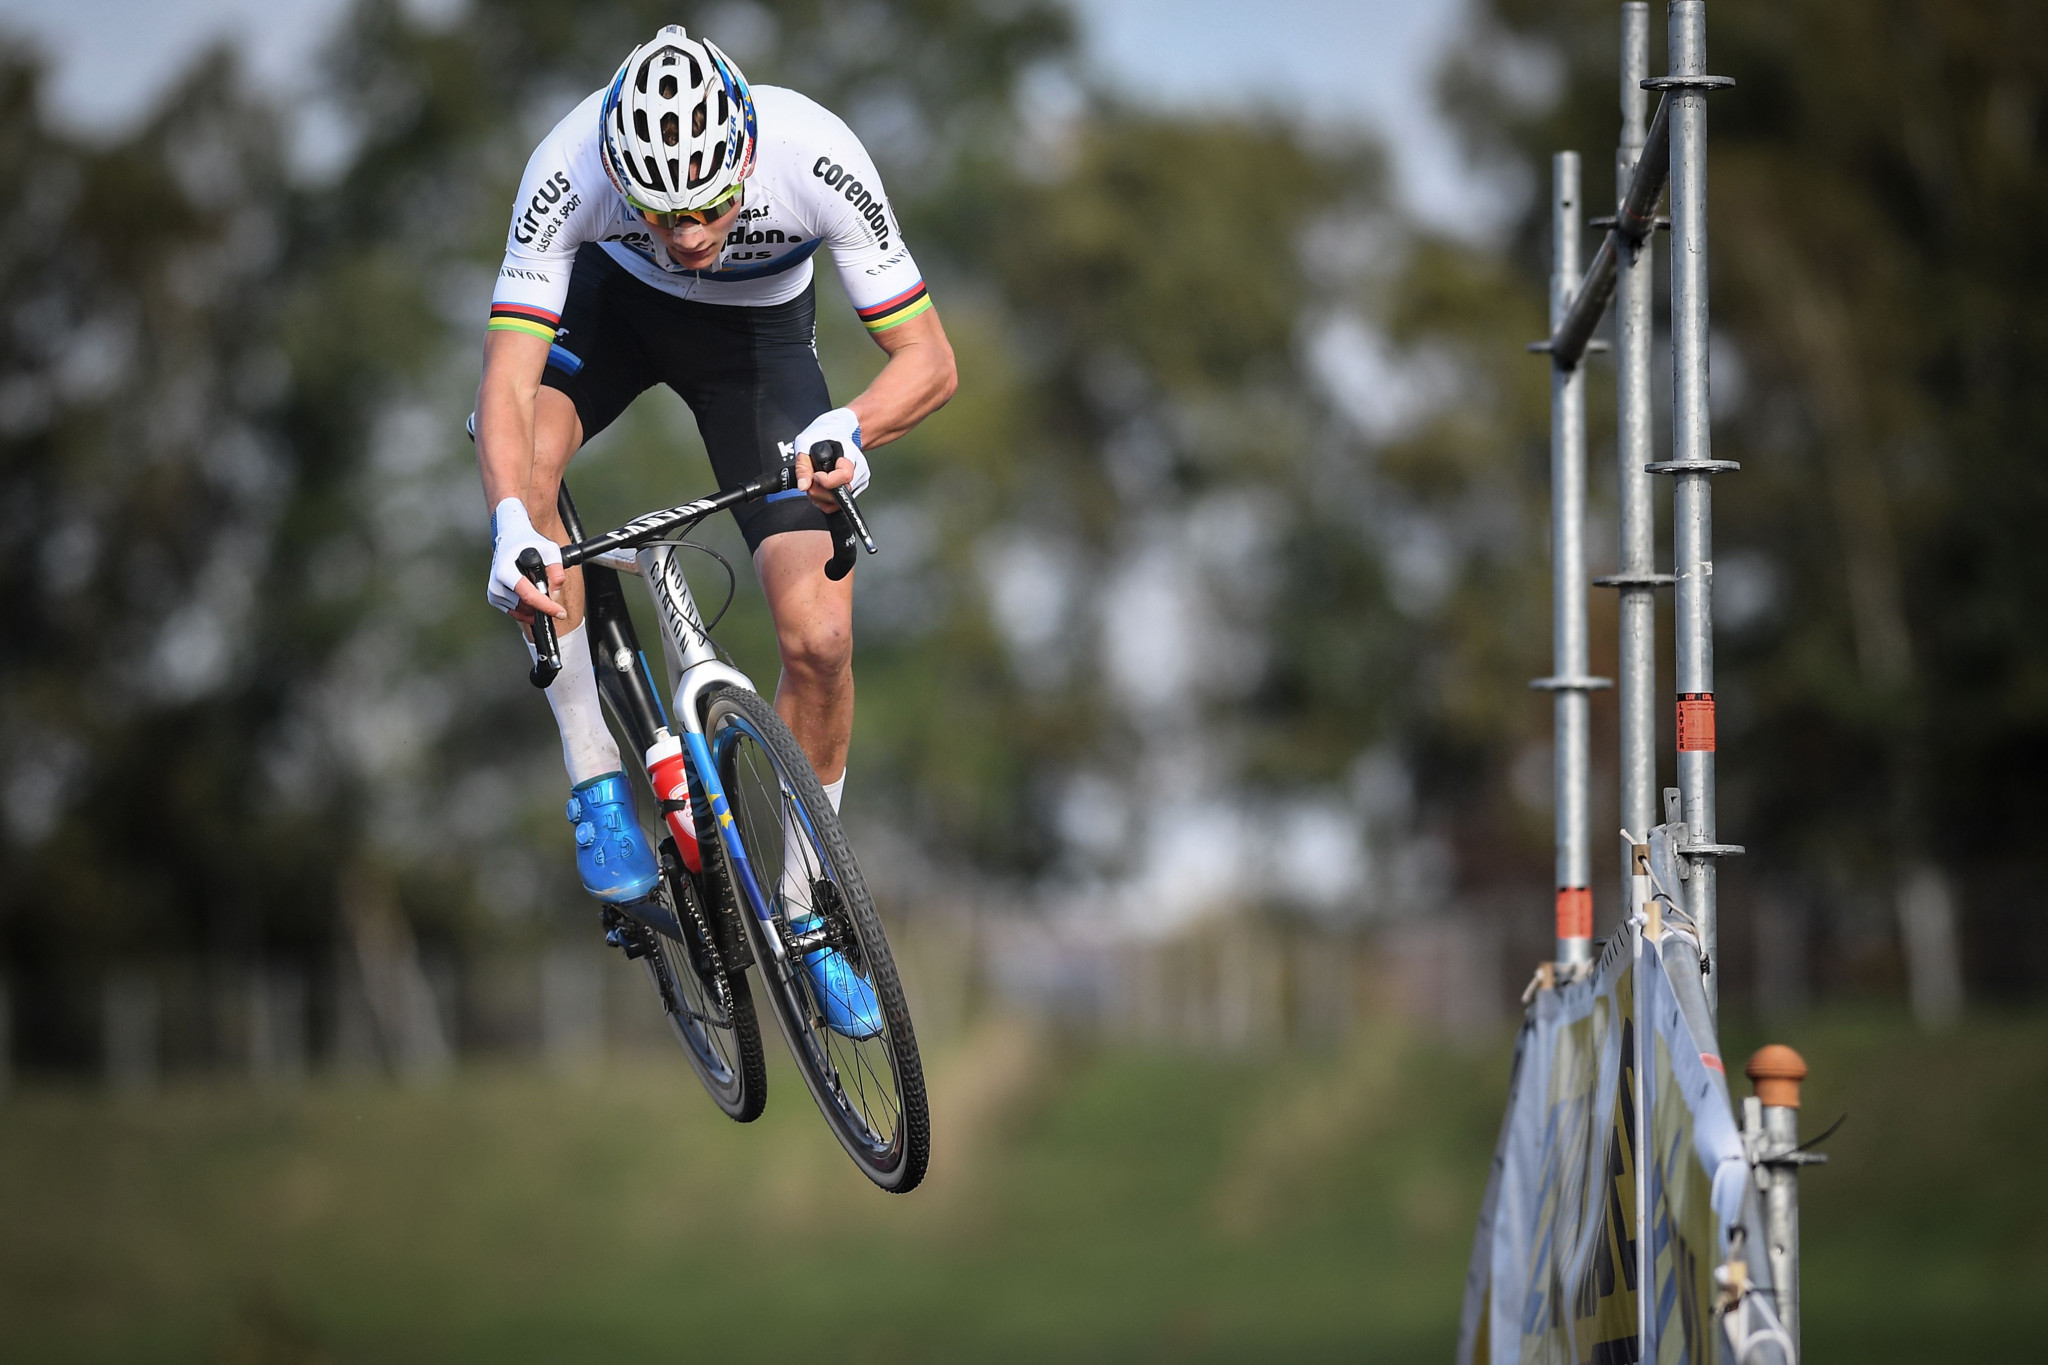 World champions to battle it out at Cyclo-Cross European Championships